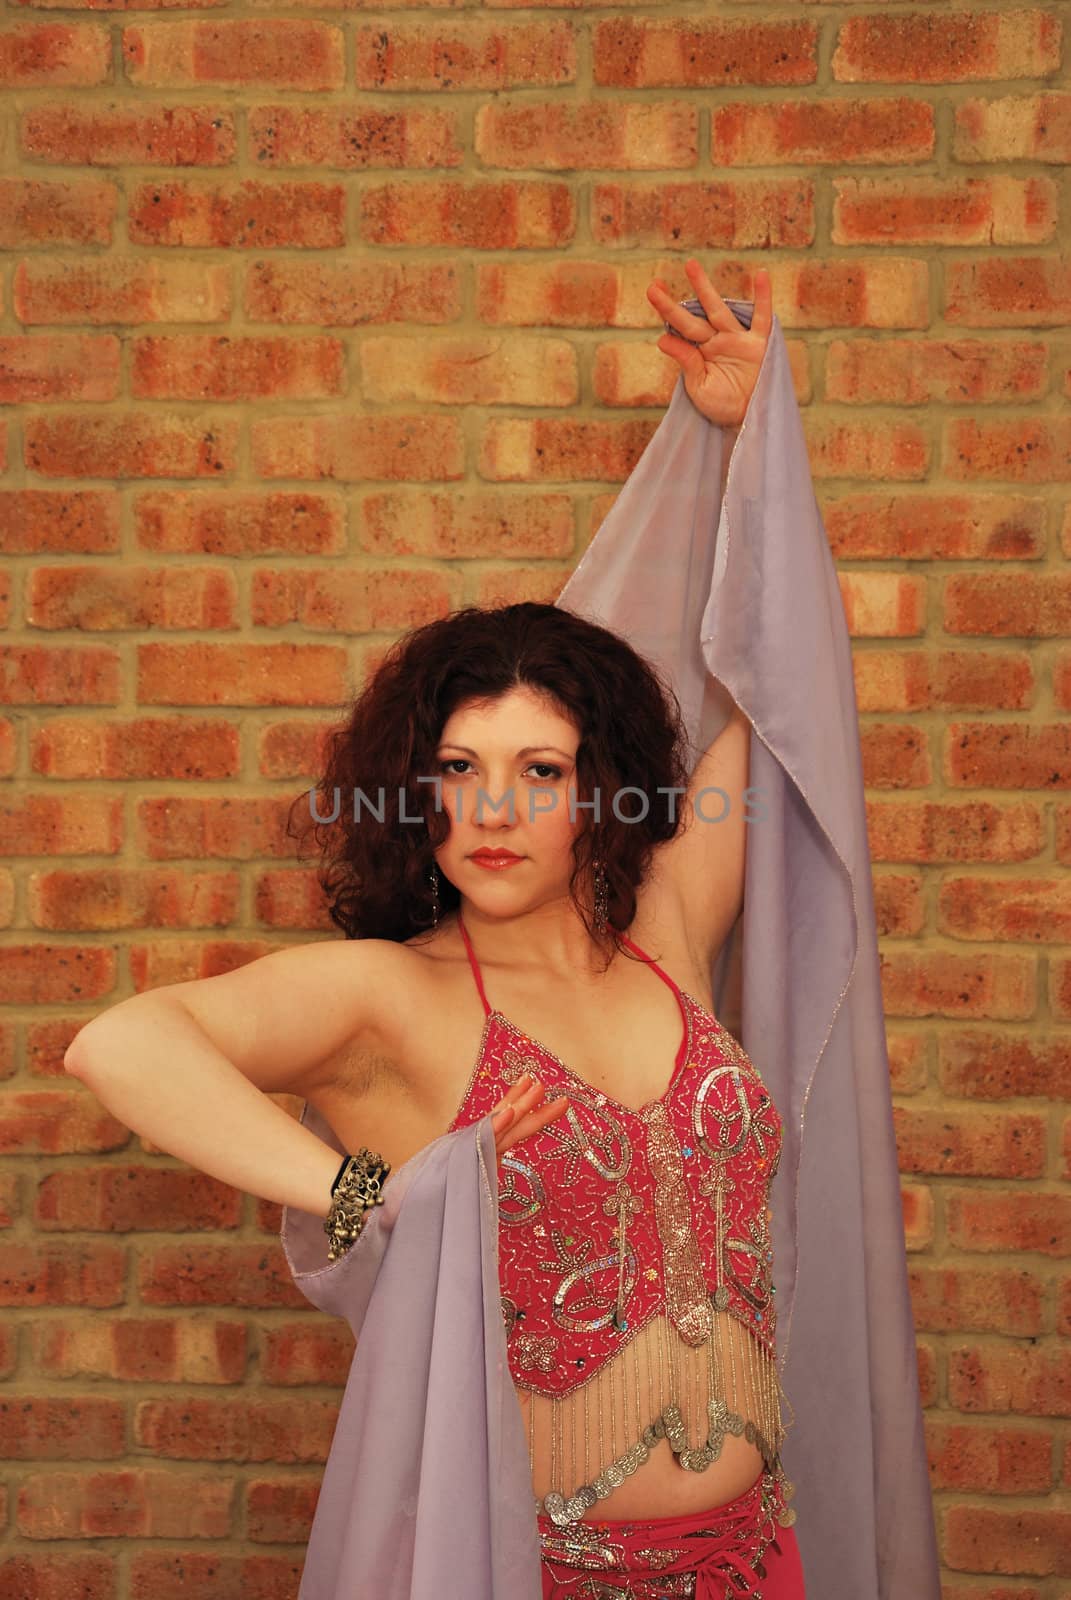 belly dancer with veil